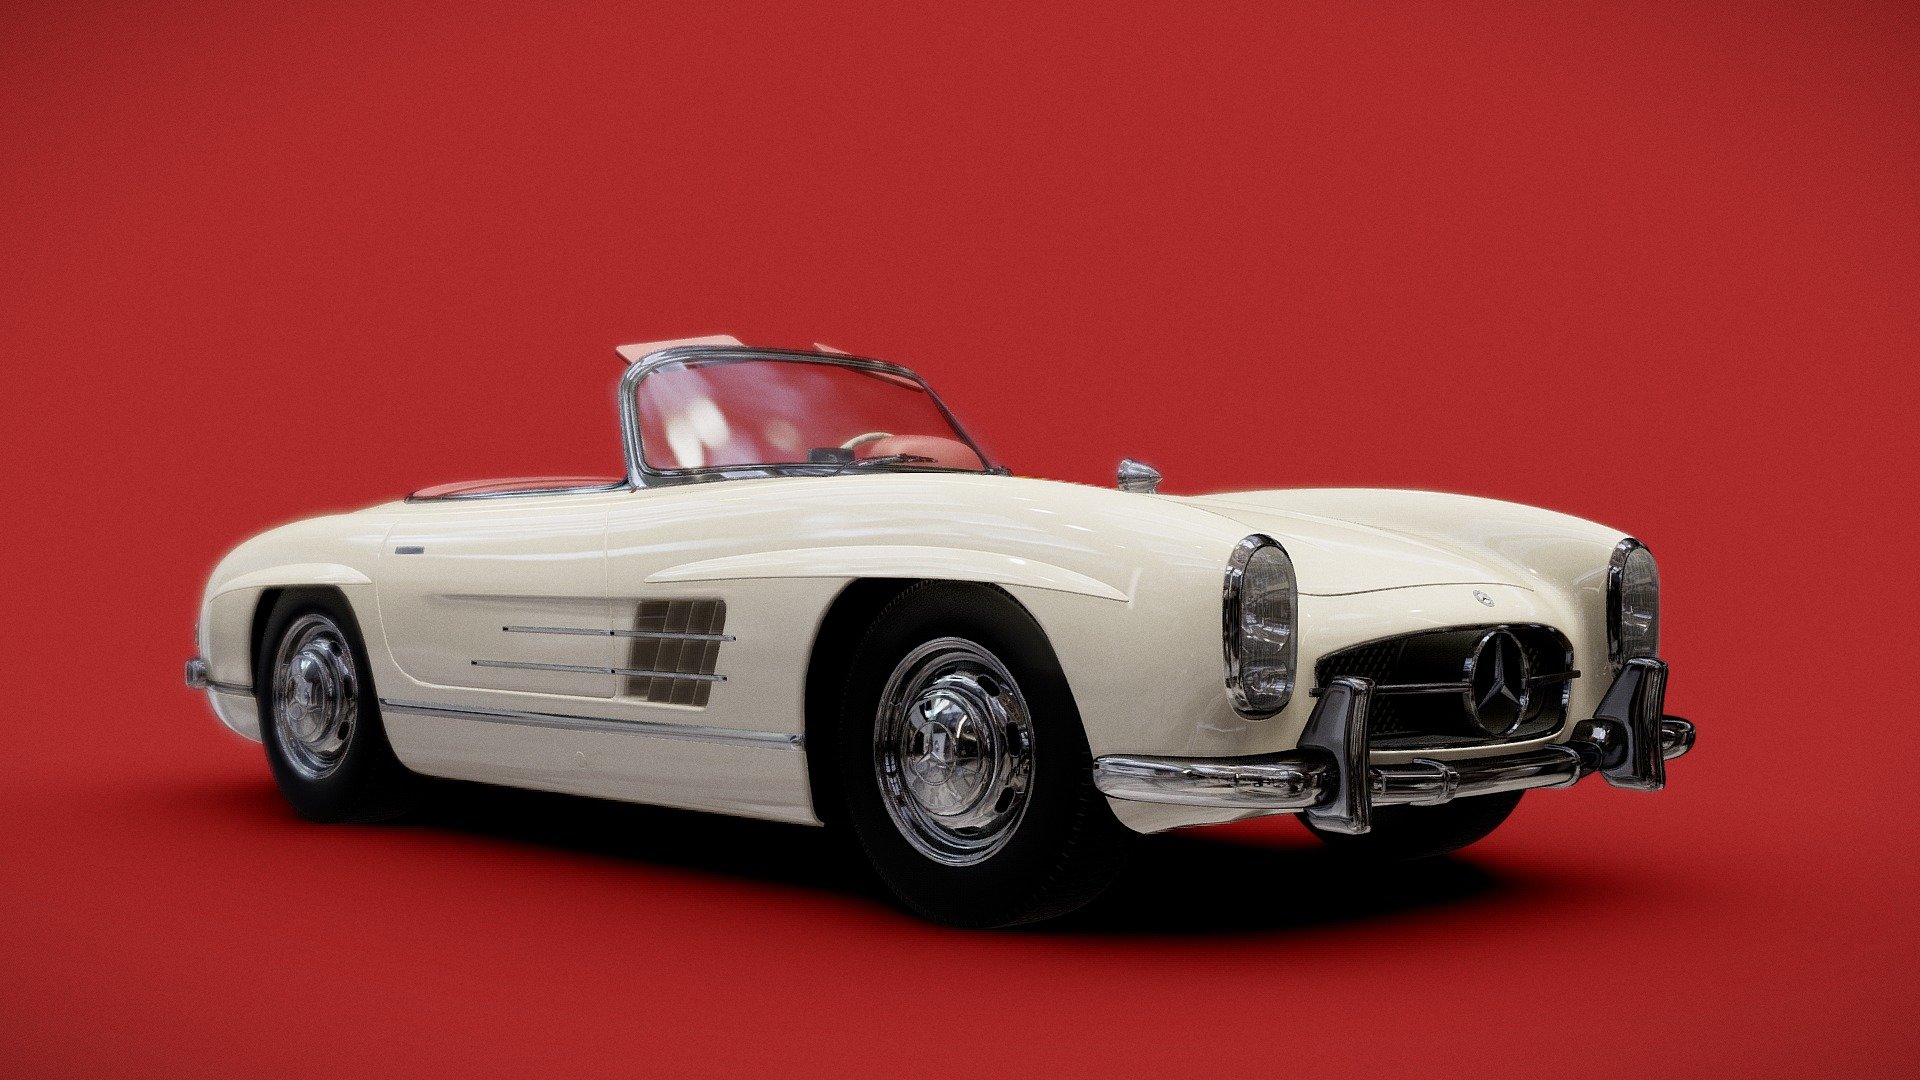 **3d car model of Mercedes Benz SL300 roadster

fully editable / rigable

by getting this model you have full control on meshes and materials

you can even subdivide all parts in blneder for having better looking details.

you can support me by folowing me on instagram

my ig: ZIRODESIGN - Mercedes Benz SL300 roadster - Buy Royalty Free 3D model by ZIRODESIGN 3d model